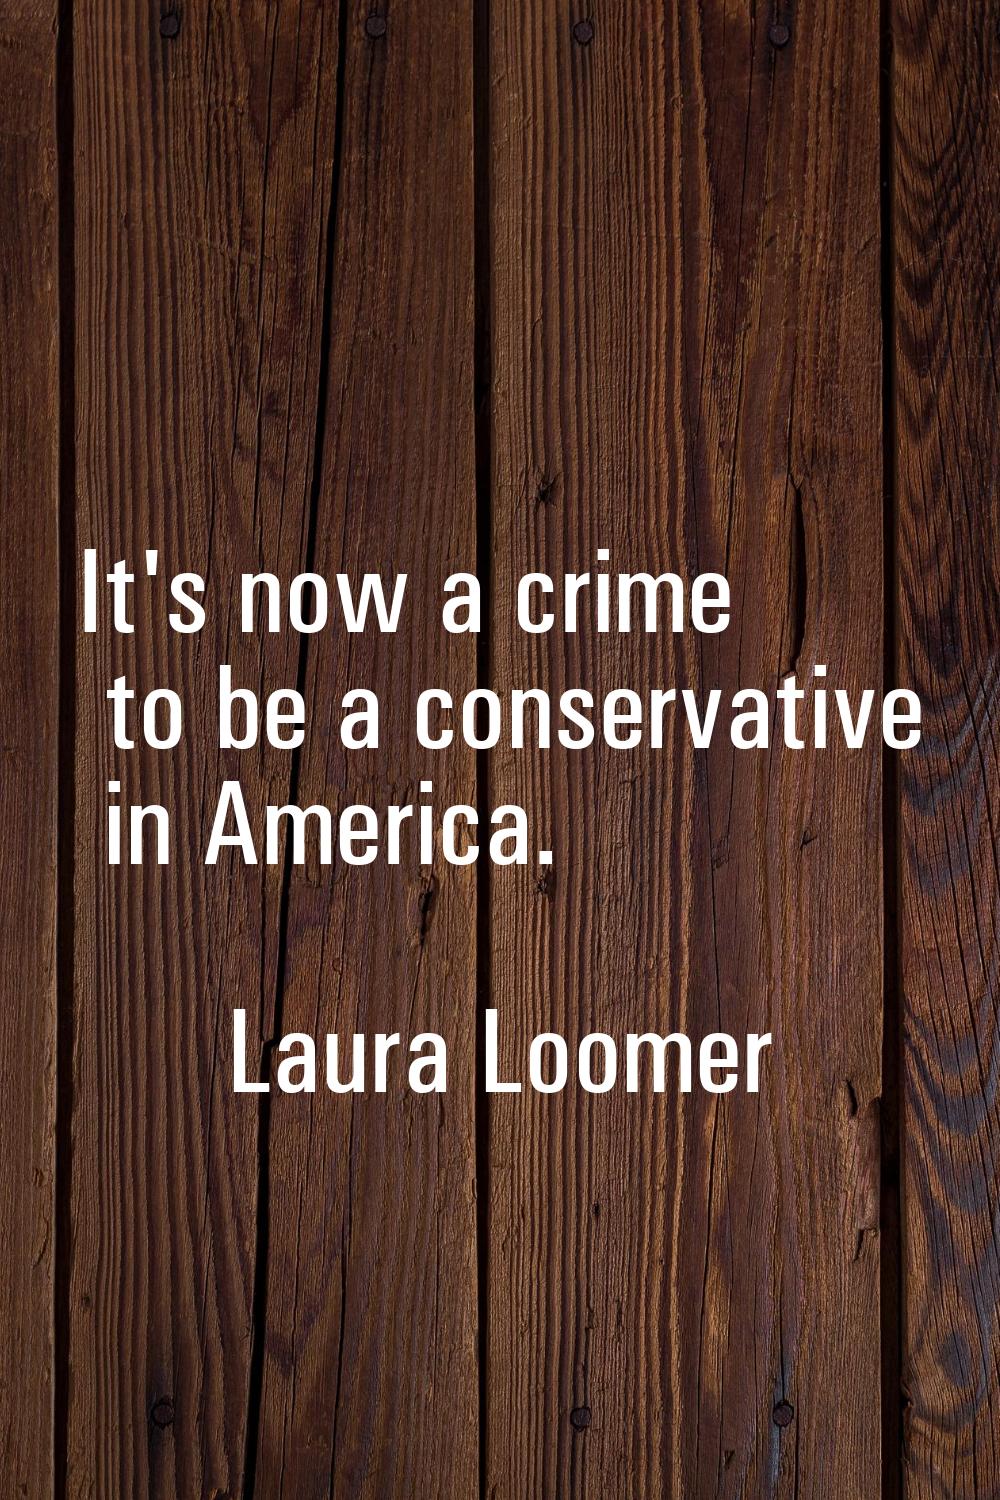 It's now a crime to be a conservative in America.